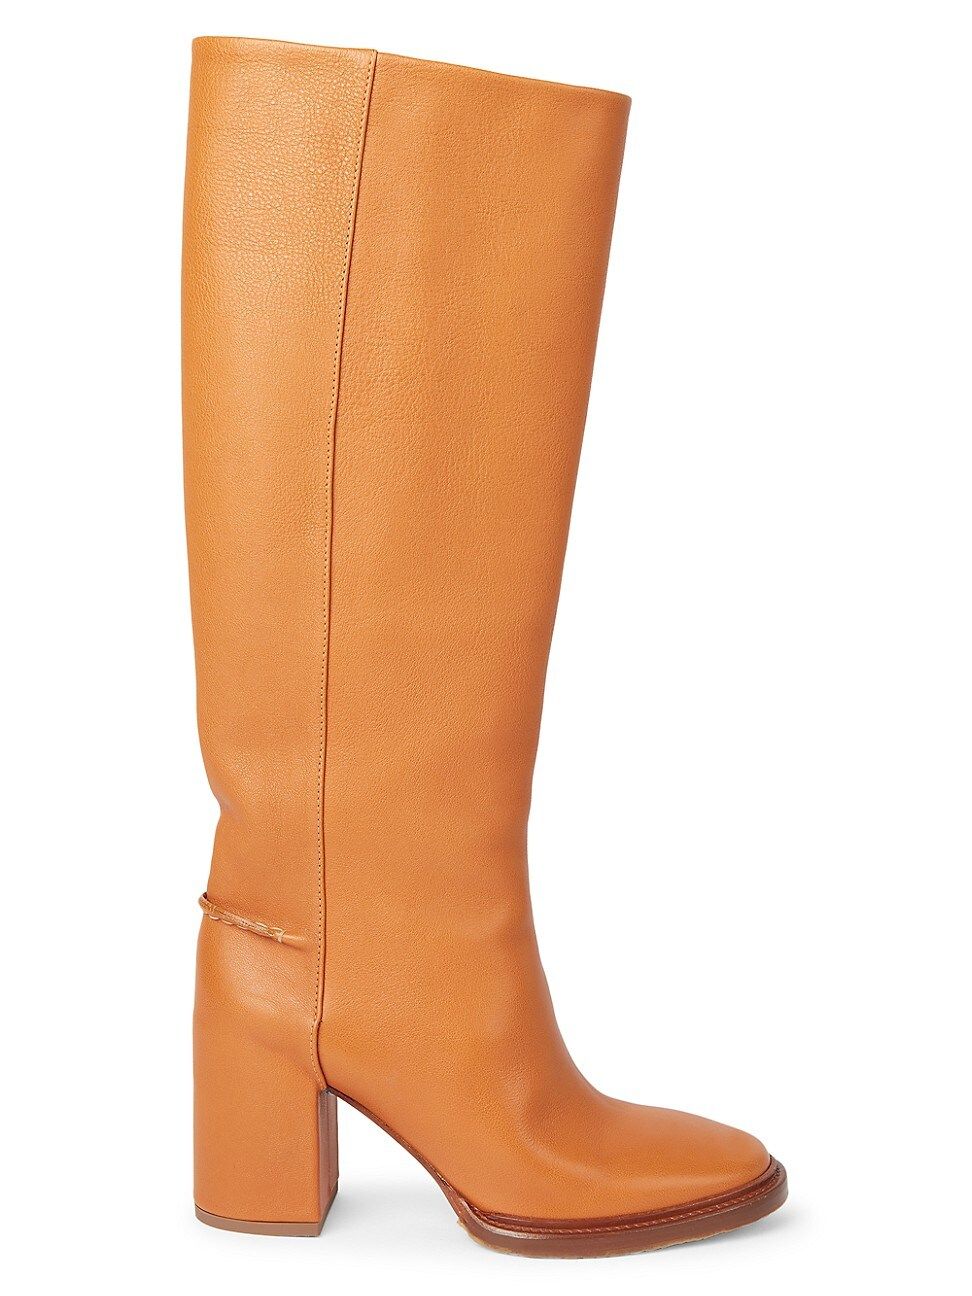 Chlo Edith Leather Knee-High Boots | Saks Fifth Avenue